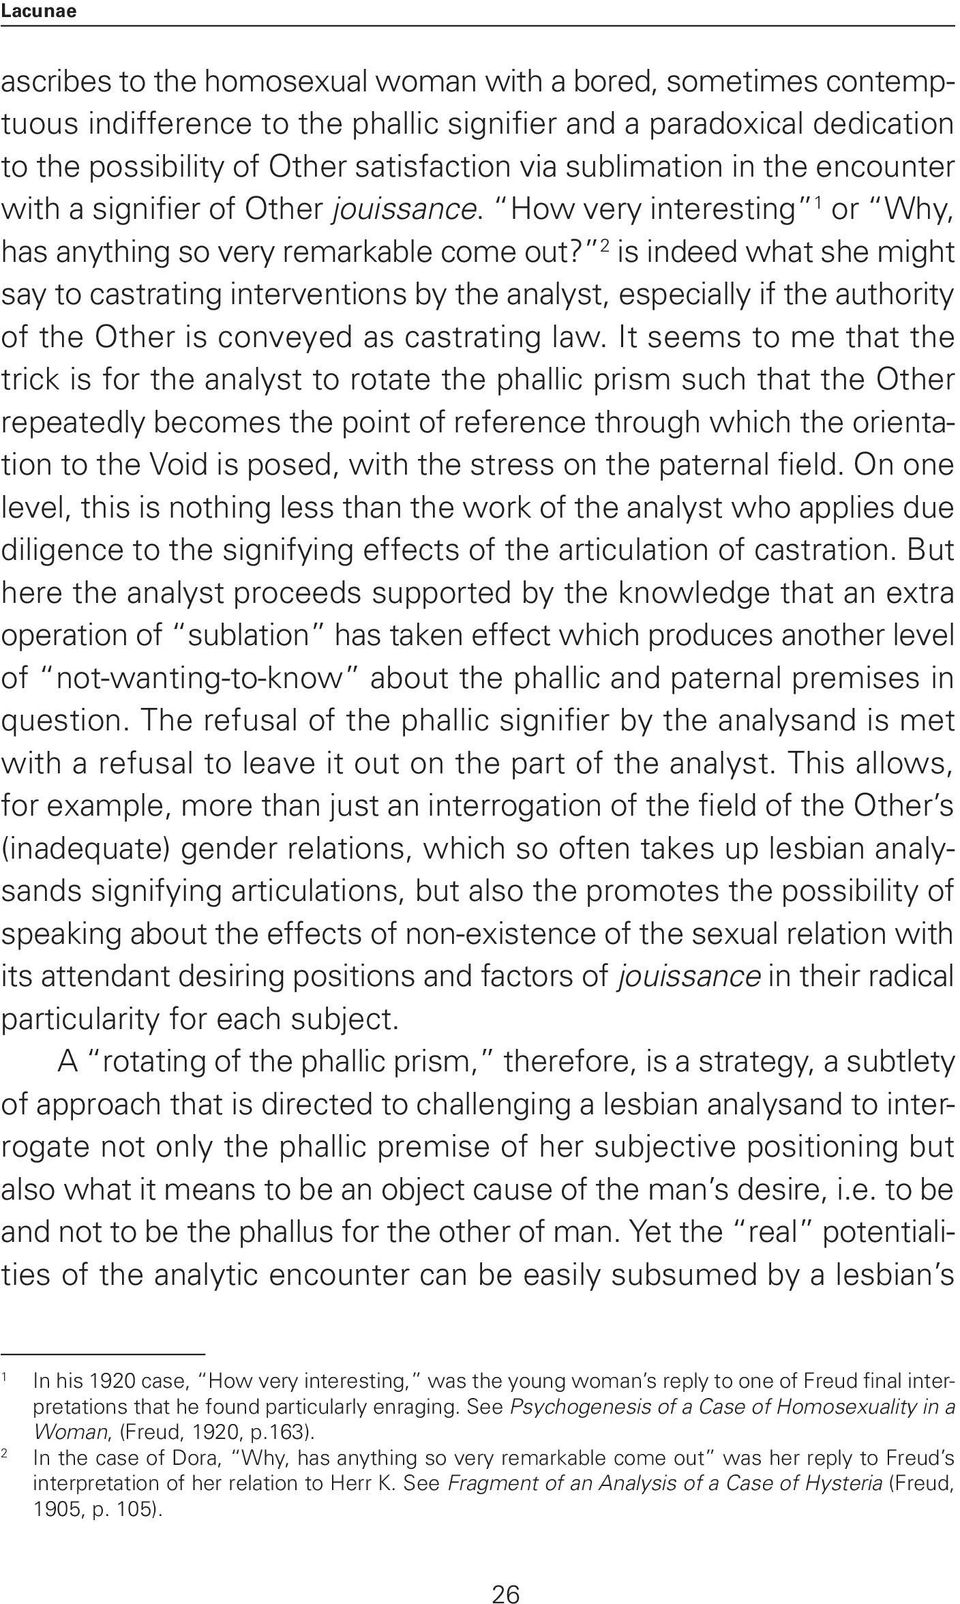 A review of freuds the psychogenesis of a case of homosexuality in a woman